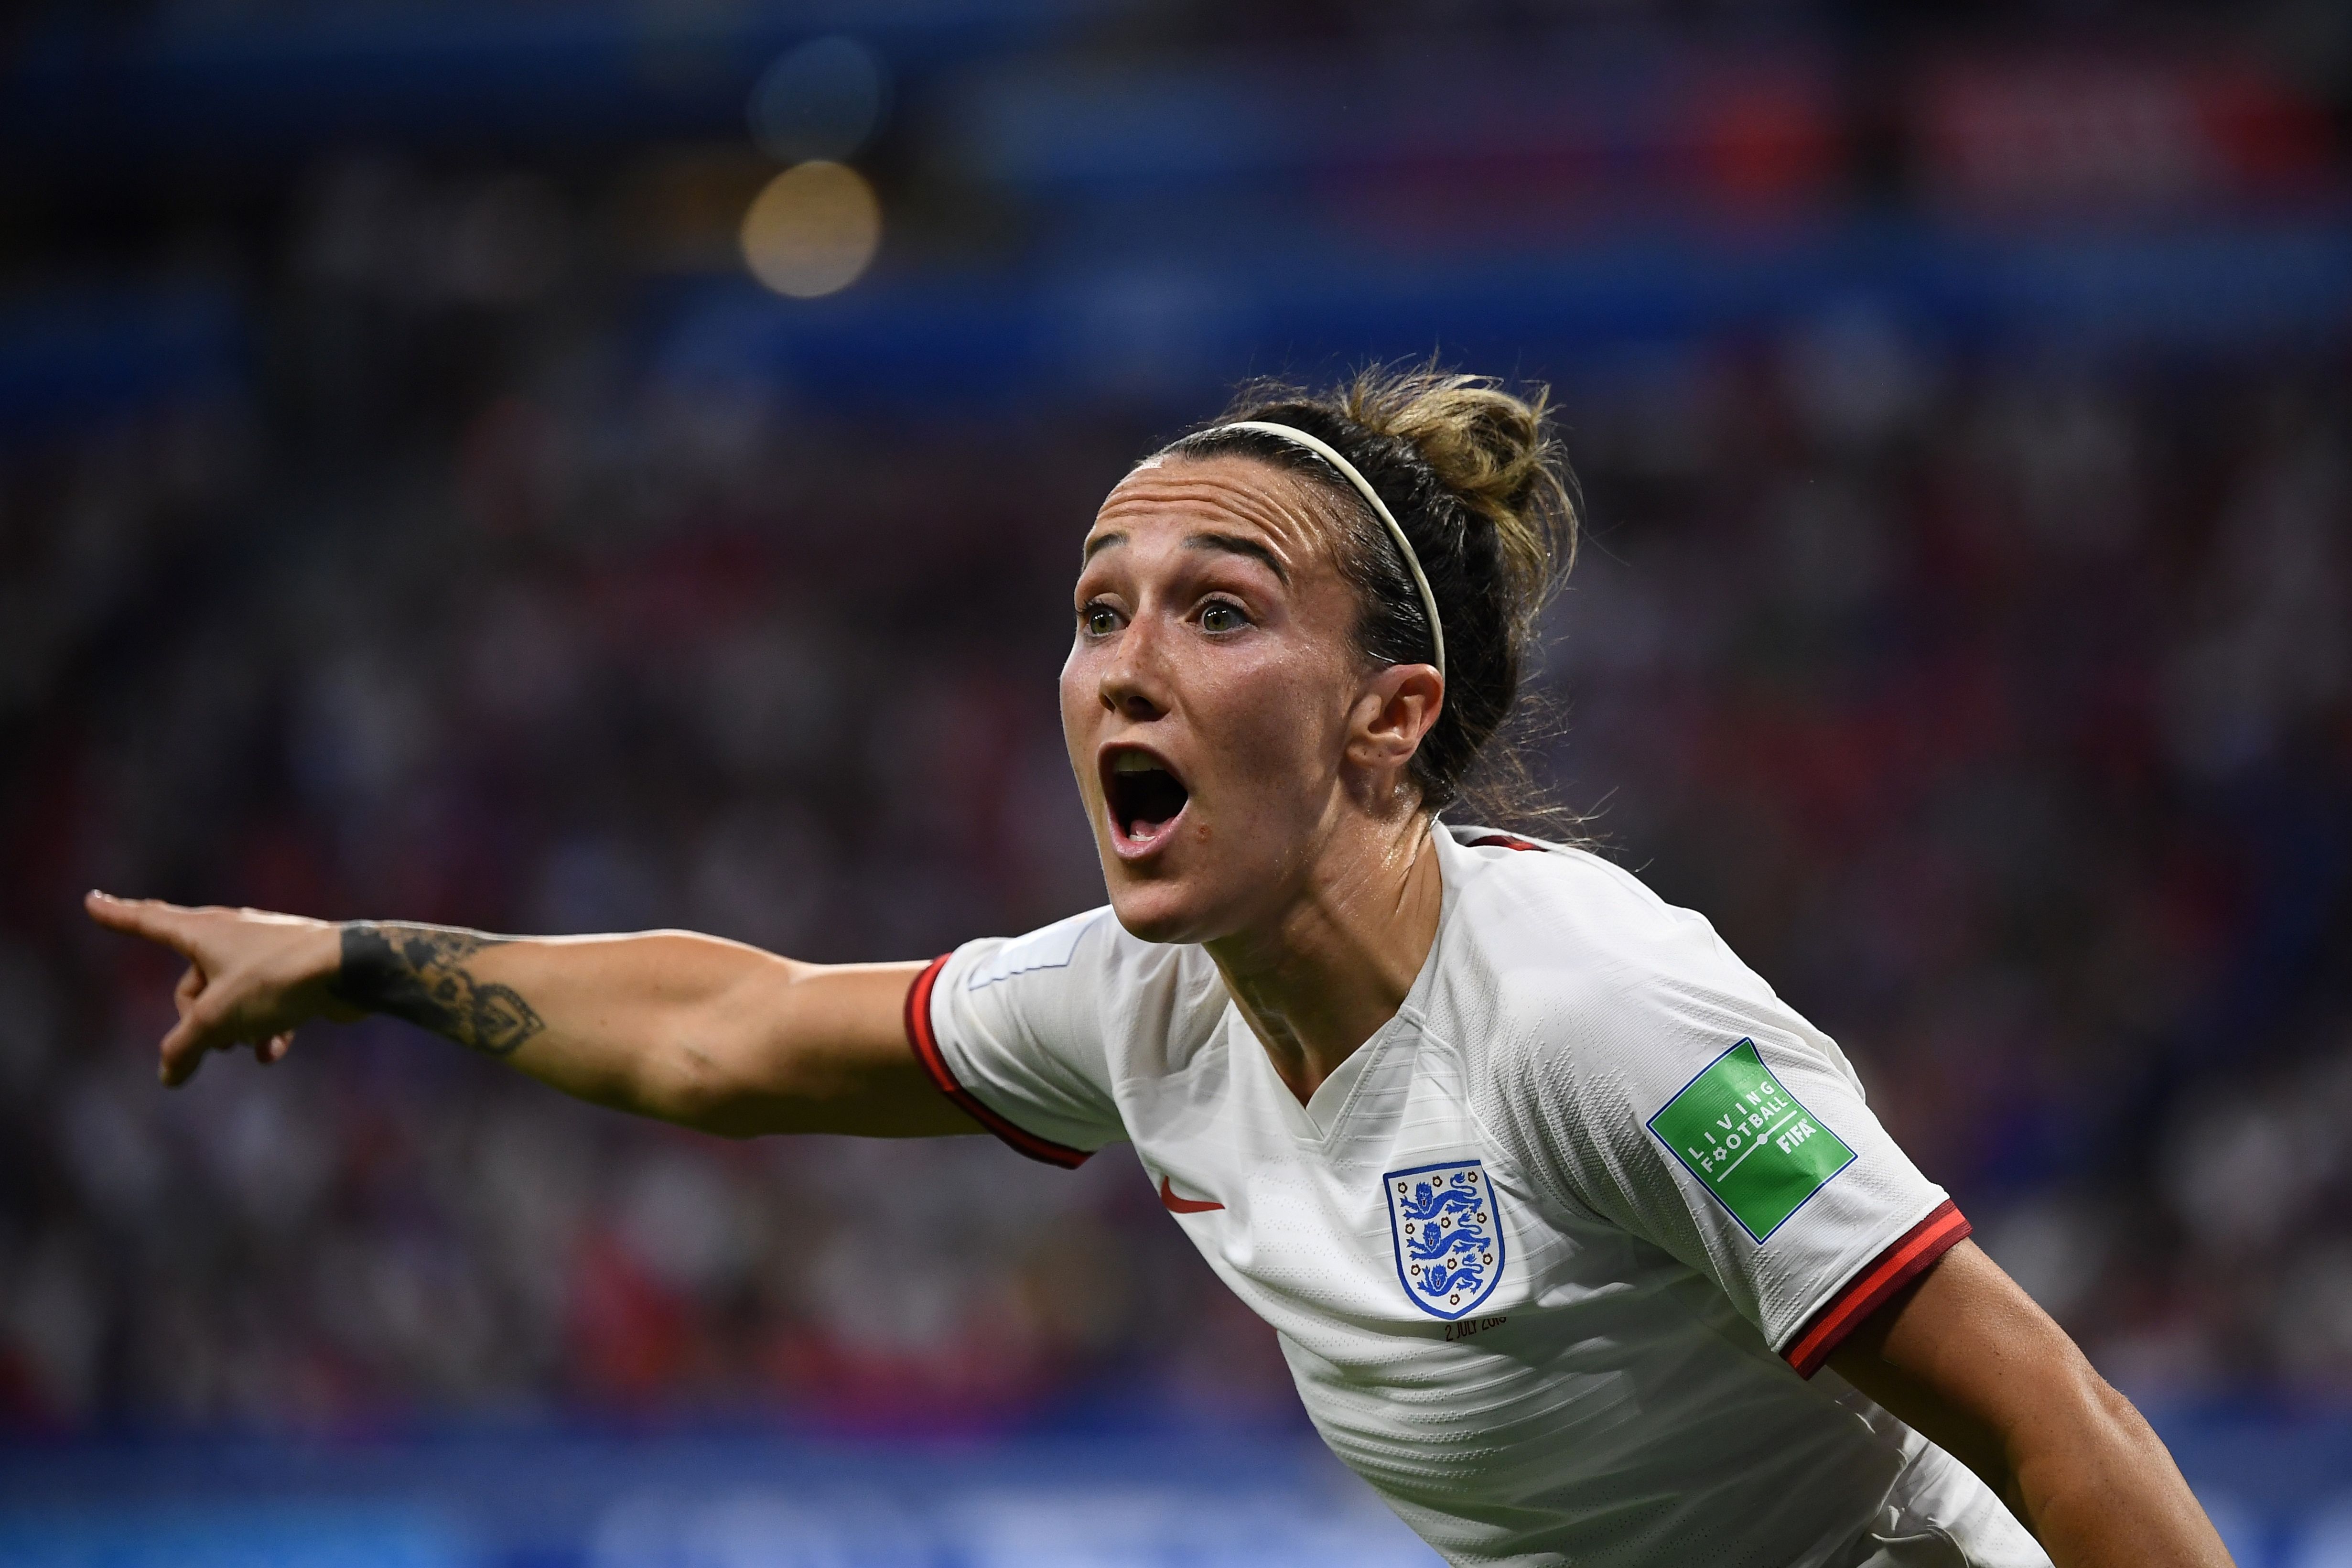 Lucy Bronze helped England make the semifinal at the Women's World Cup